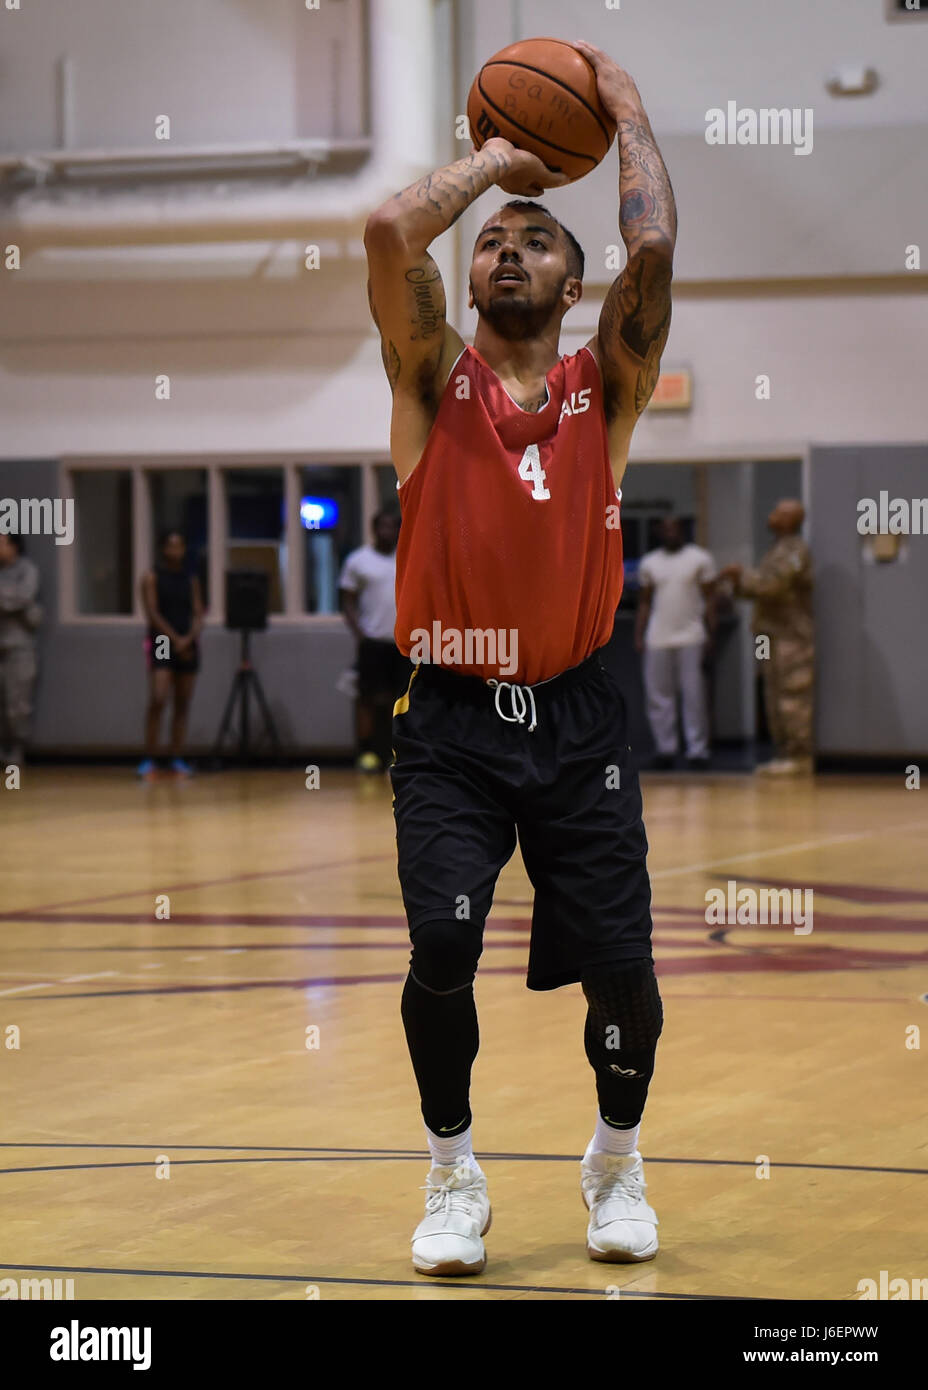 Lonnie Perrin, a member of the 1st Special Operations Medical Group basketball team, shoots a free throw during the intramural basketball championship at the Aderholt Fitness Center on Hurlburt Field, Fla., April 6, 2017. For eight weeks, 12 teams competing through a single-elimination tournament to qualify for the championship game. (U.S. Air Force photo by Airman 1st Class Joseph Pick) Stock Photo